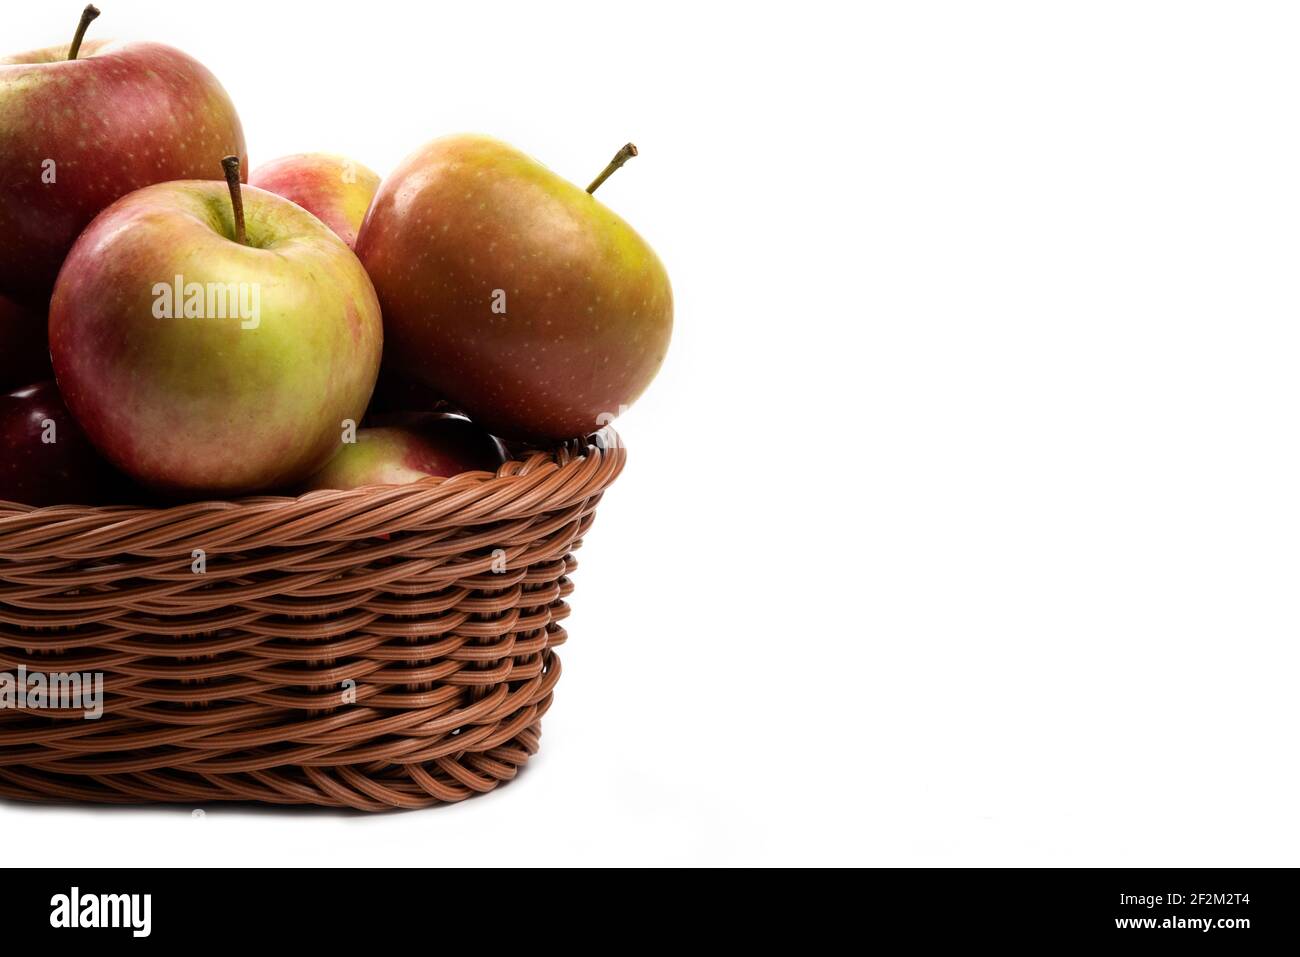 Wicker basket of fresh juicy apples isolated on white background Stock Photo